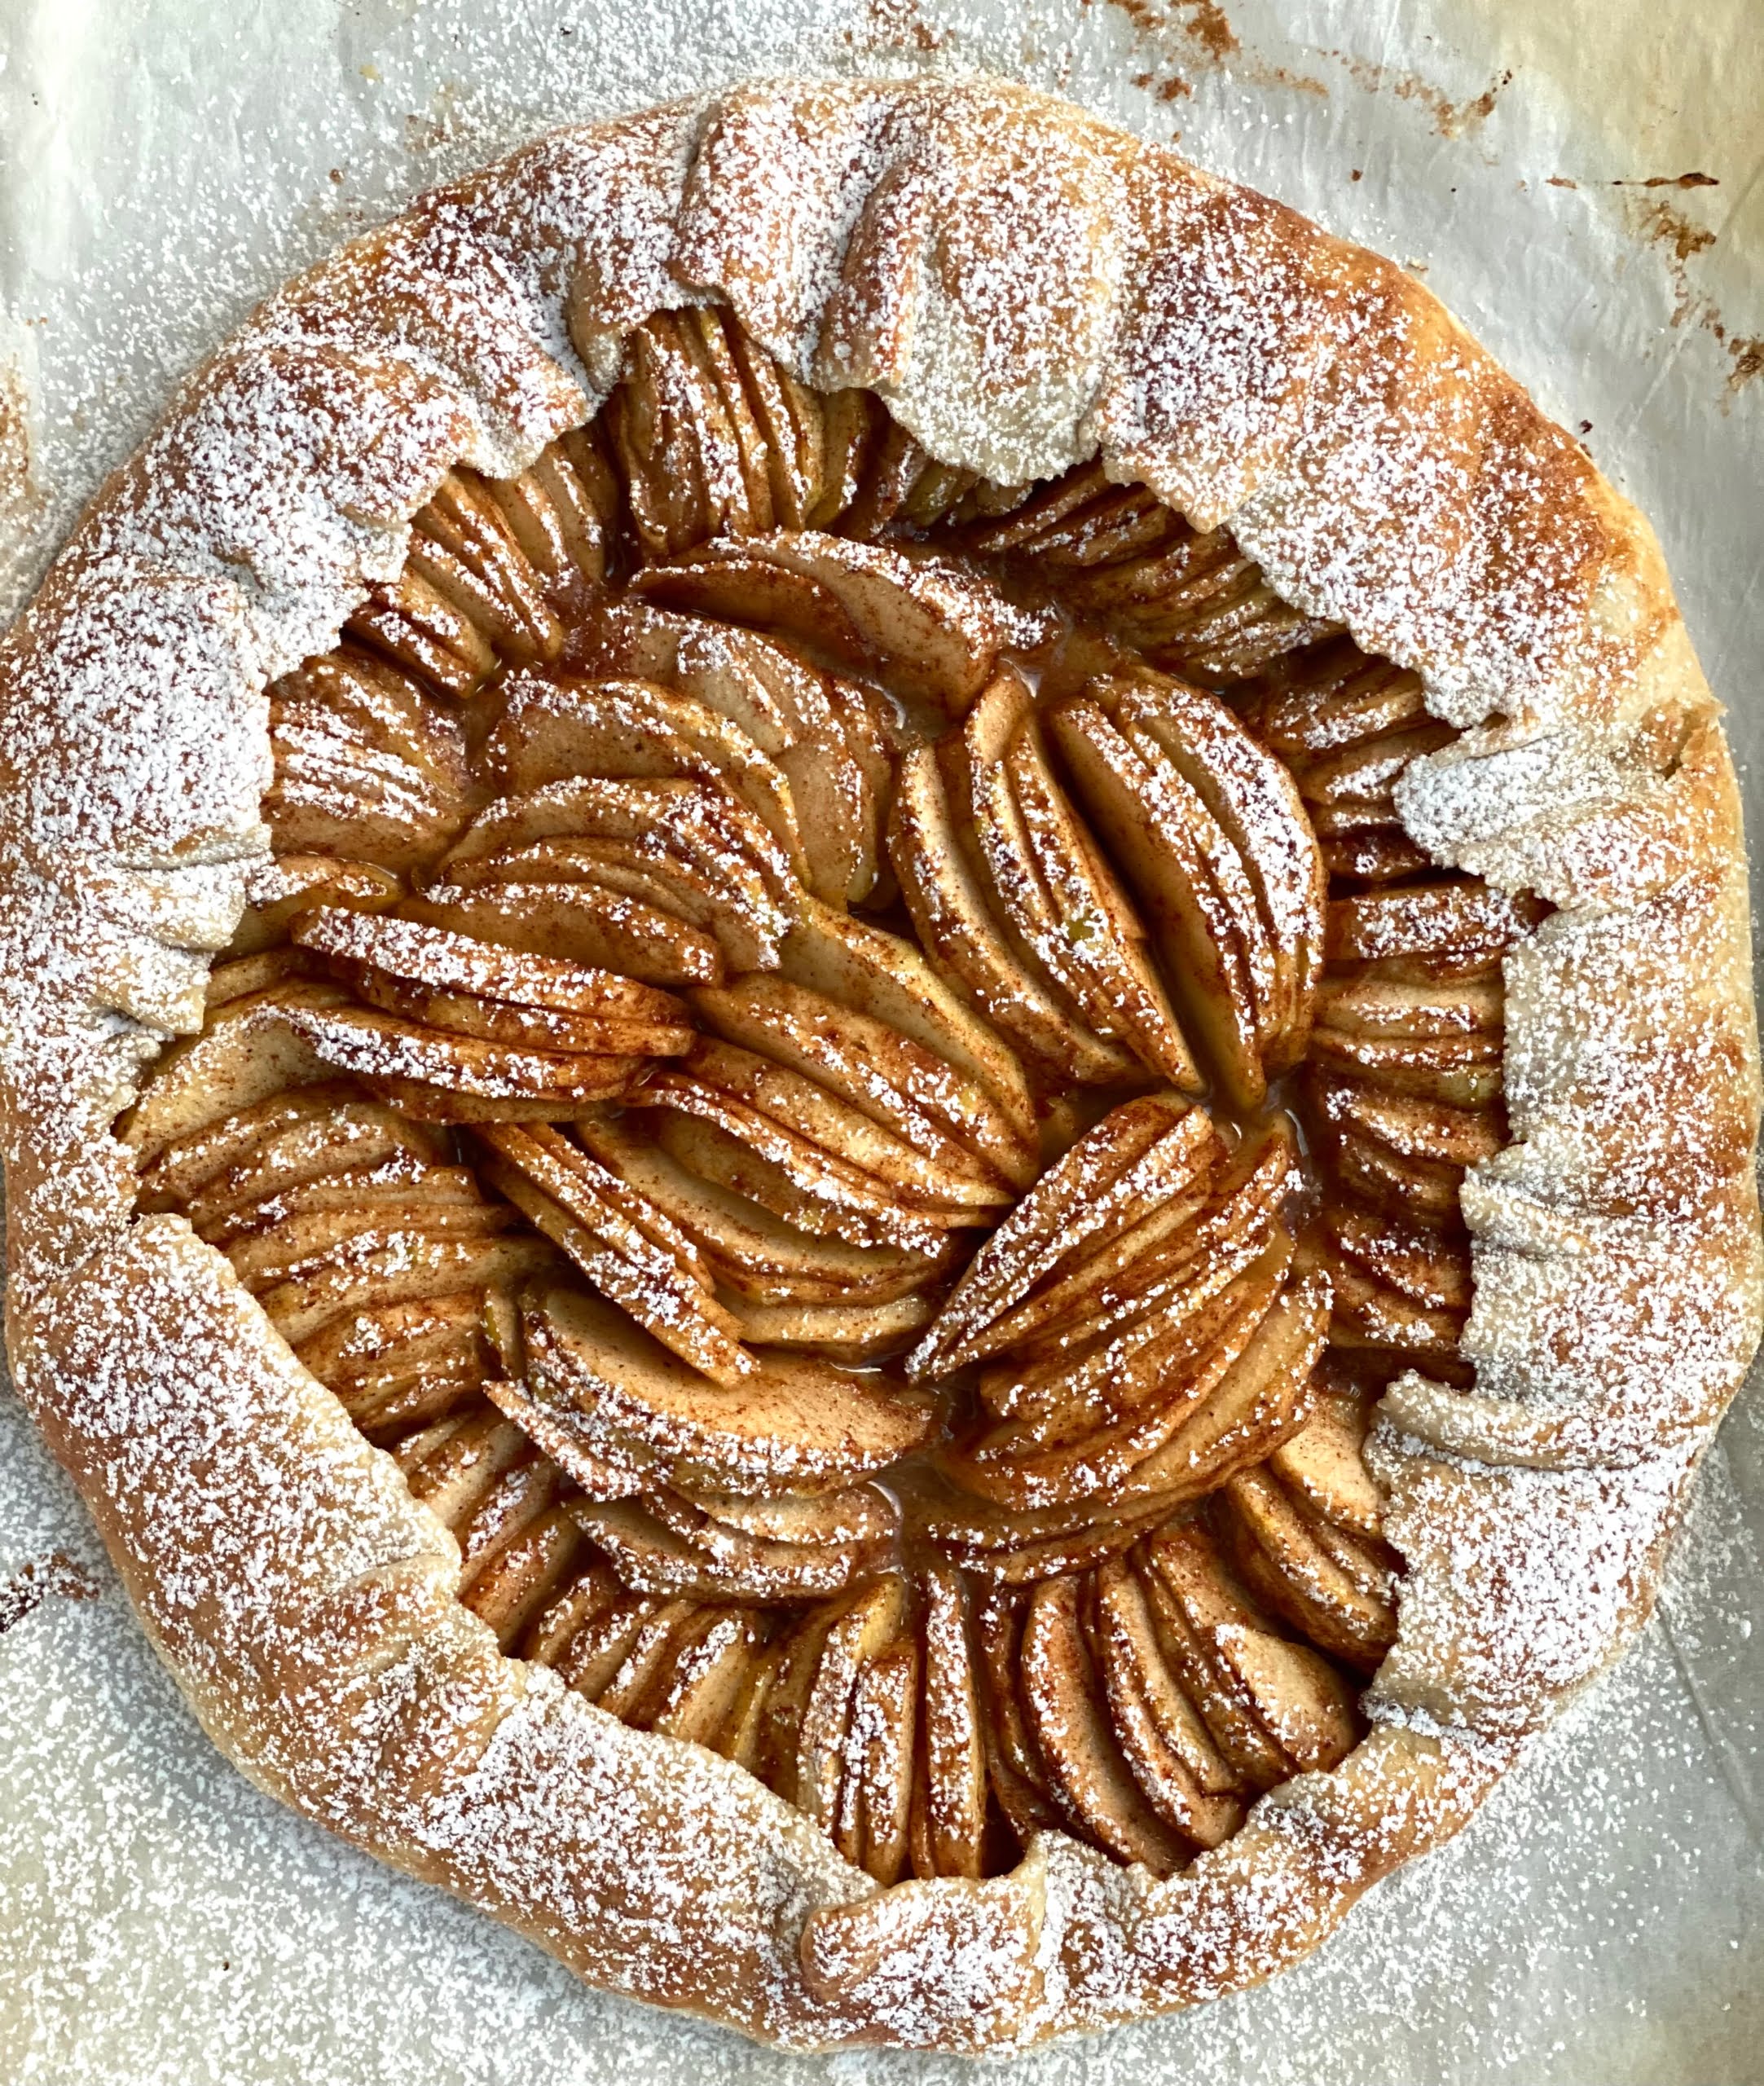 Maple and apple one crust pie dusted with icing sugar - Pure Maple